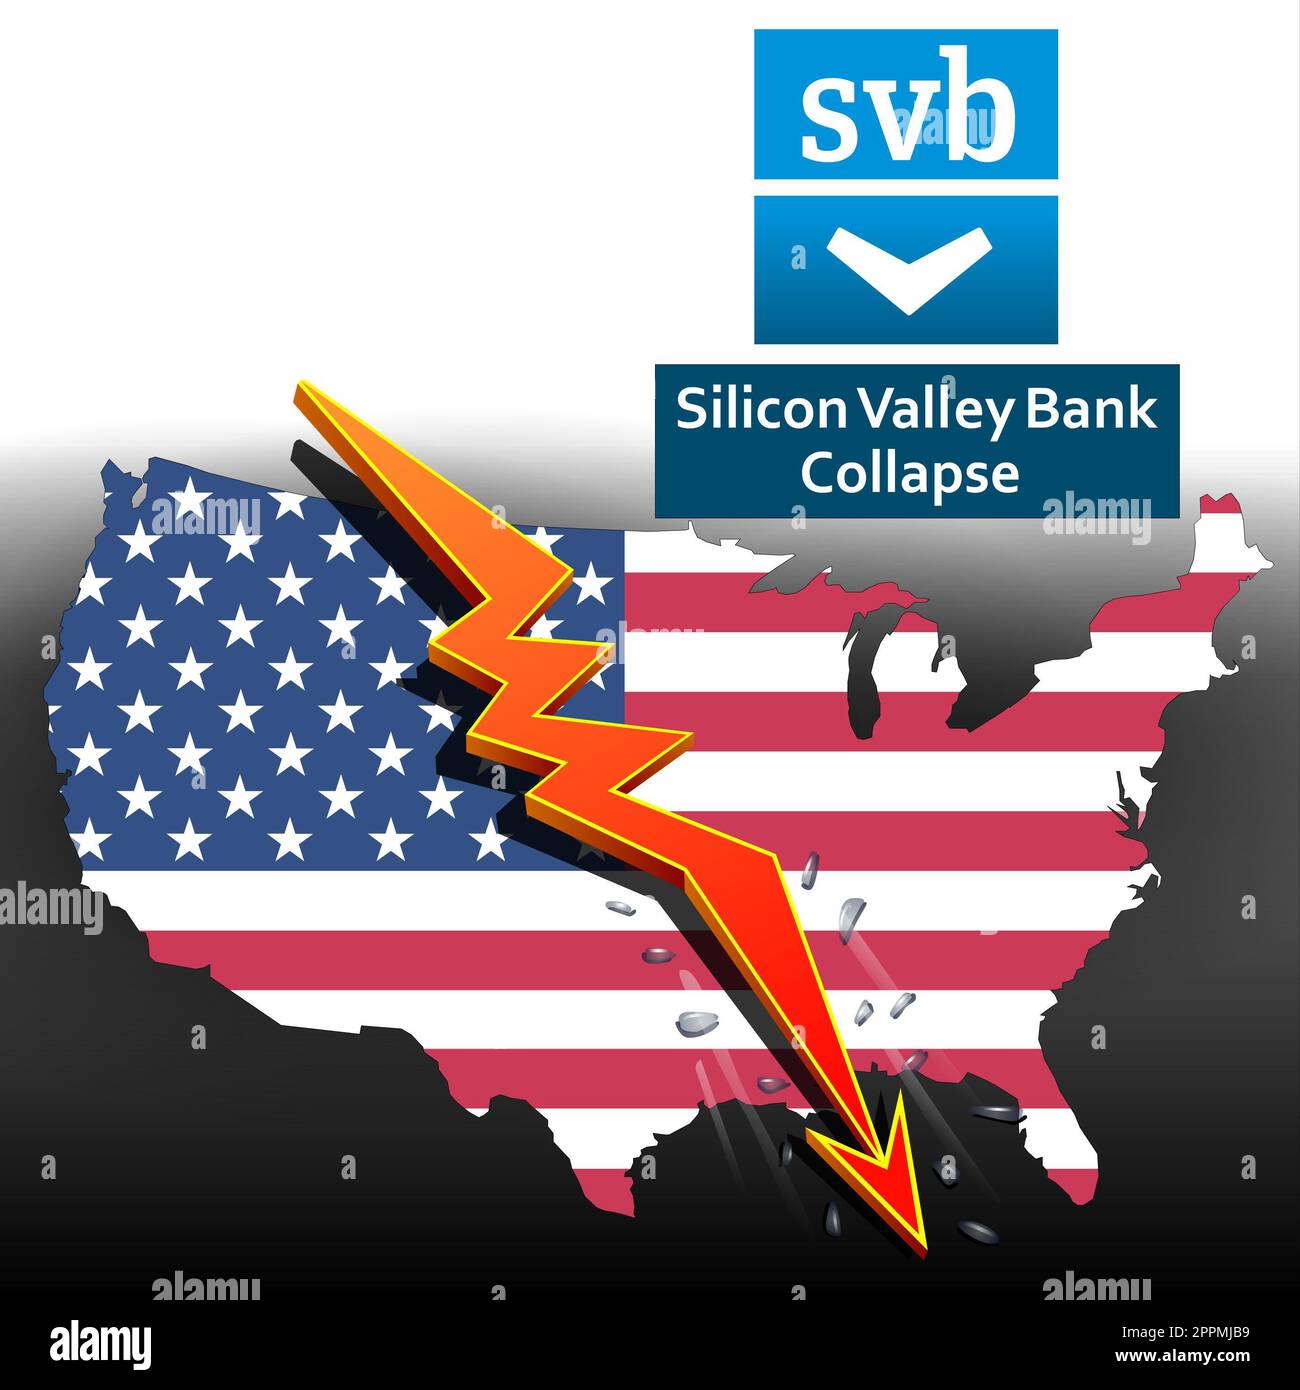 Silicon Valley Bank Collapse - Graphics - American Flag, Line Chart showing downwards Stock Photo